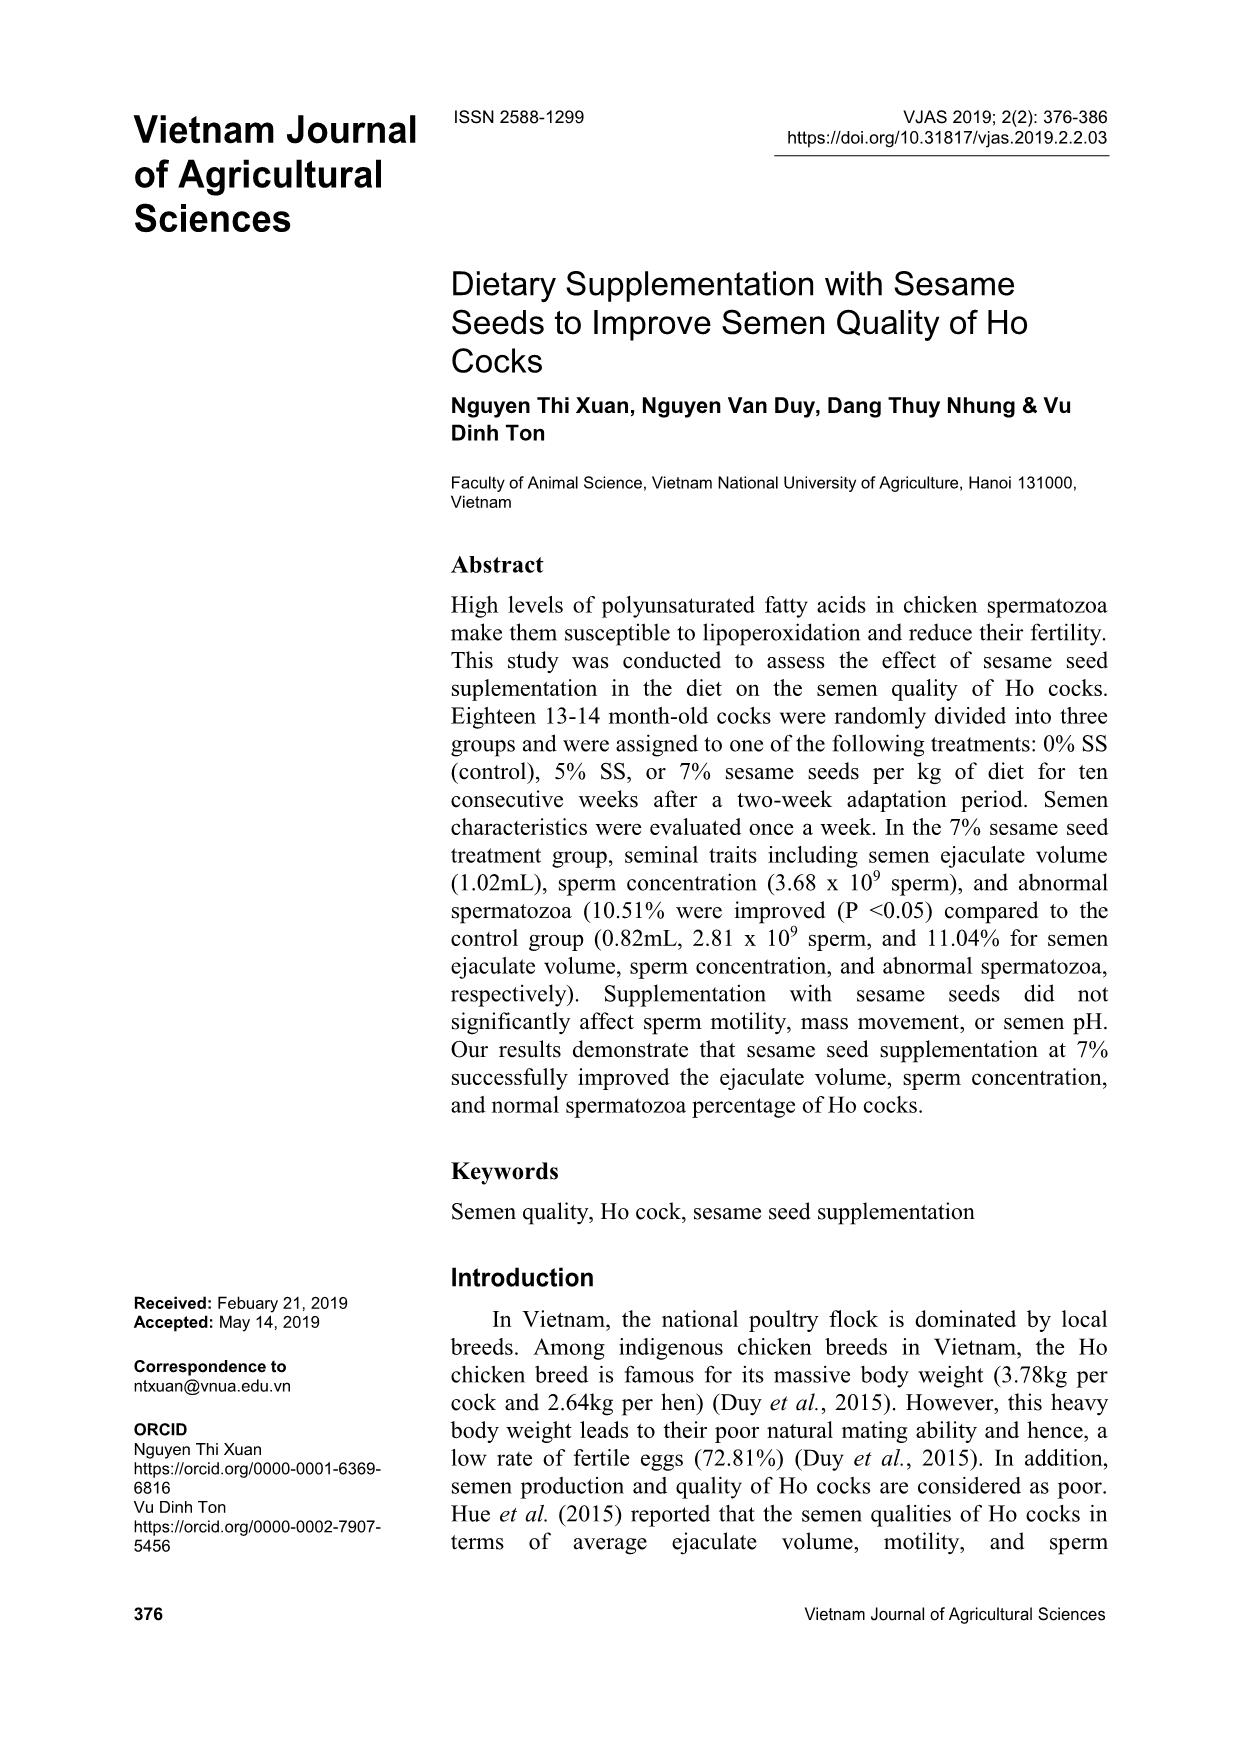 Dietary supplementation with sesame seeds to improve semen quality of Ho cocks trang 1